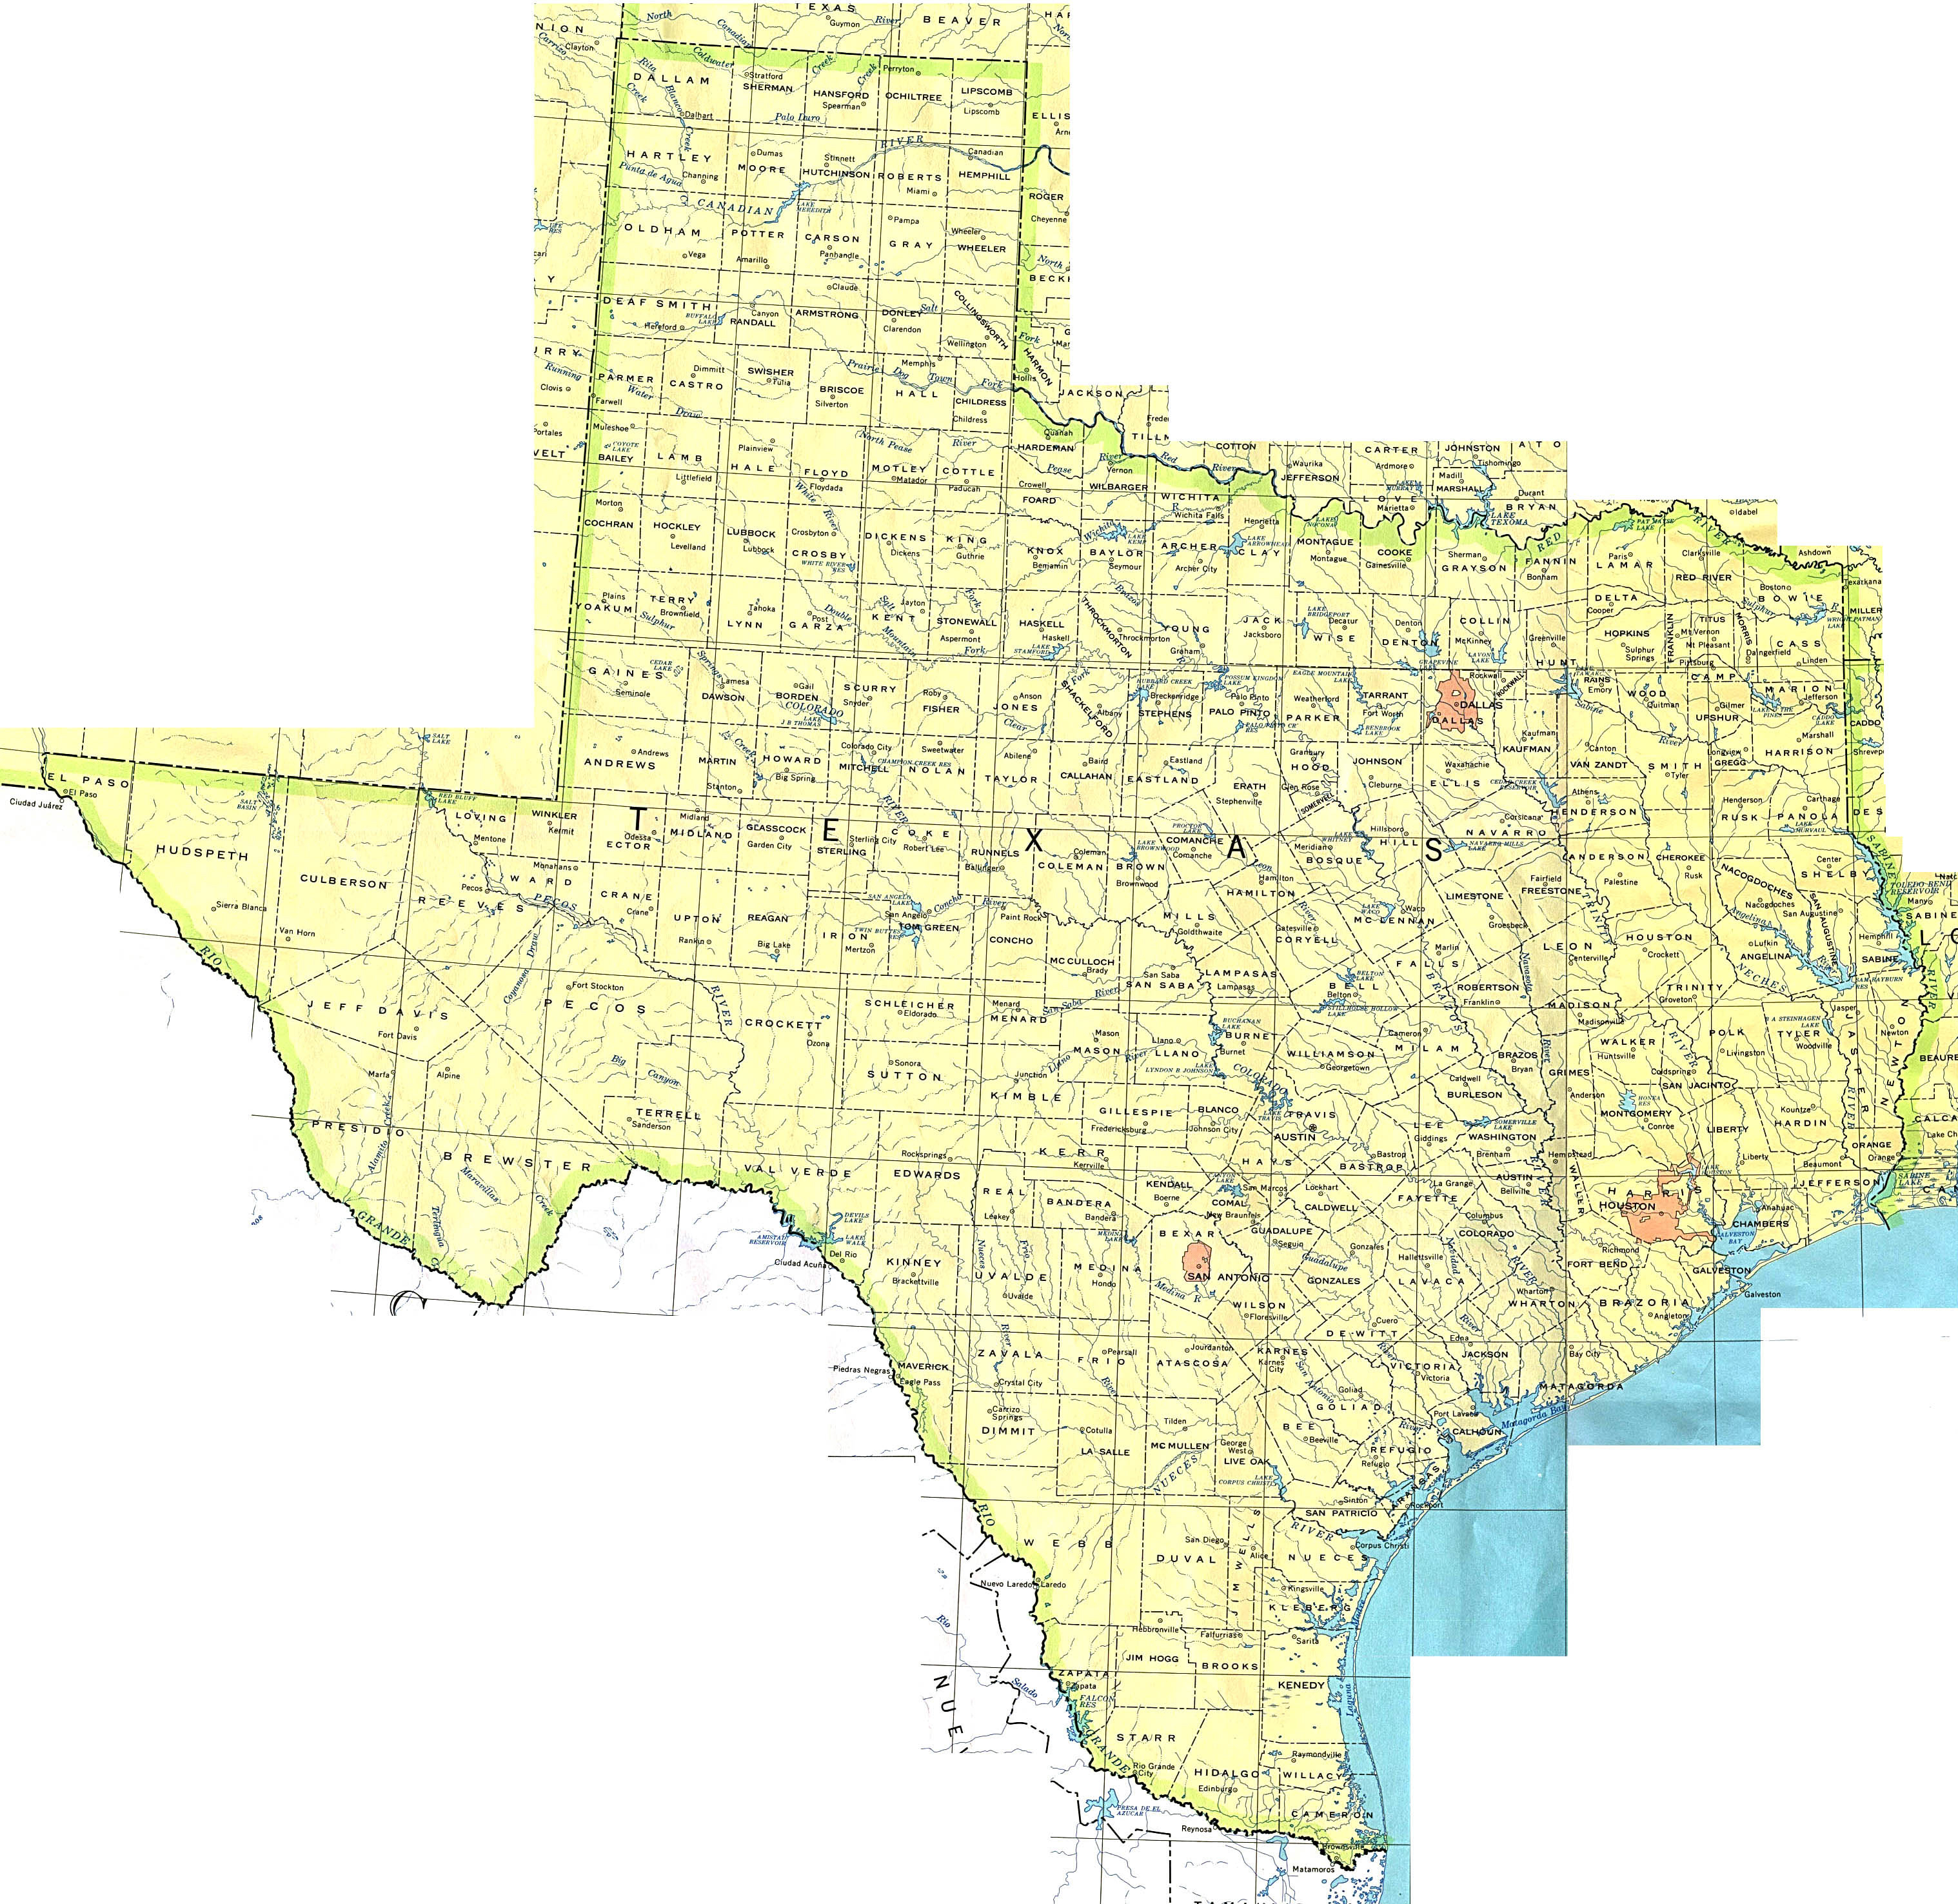 Texas Maps - Perry-Castañeda Map Collection - Ut Library Online - Texas Road Map Google